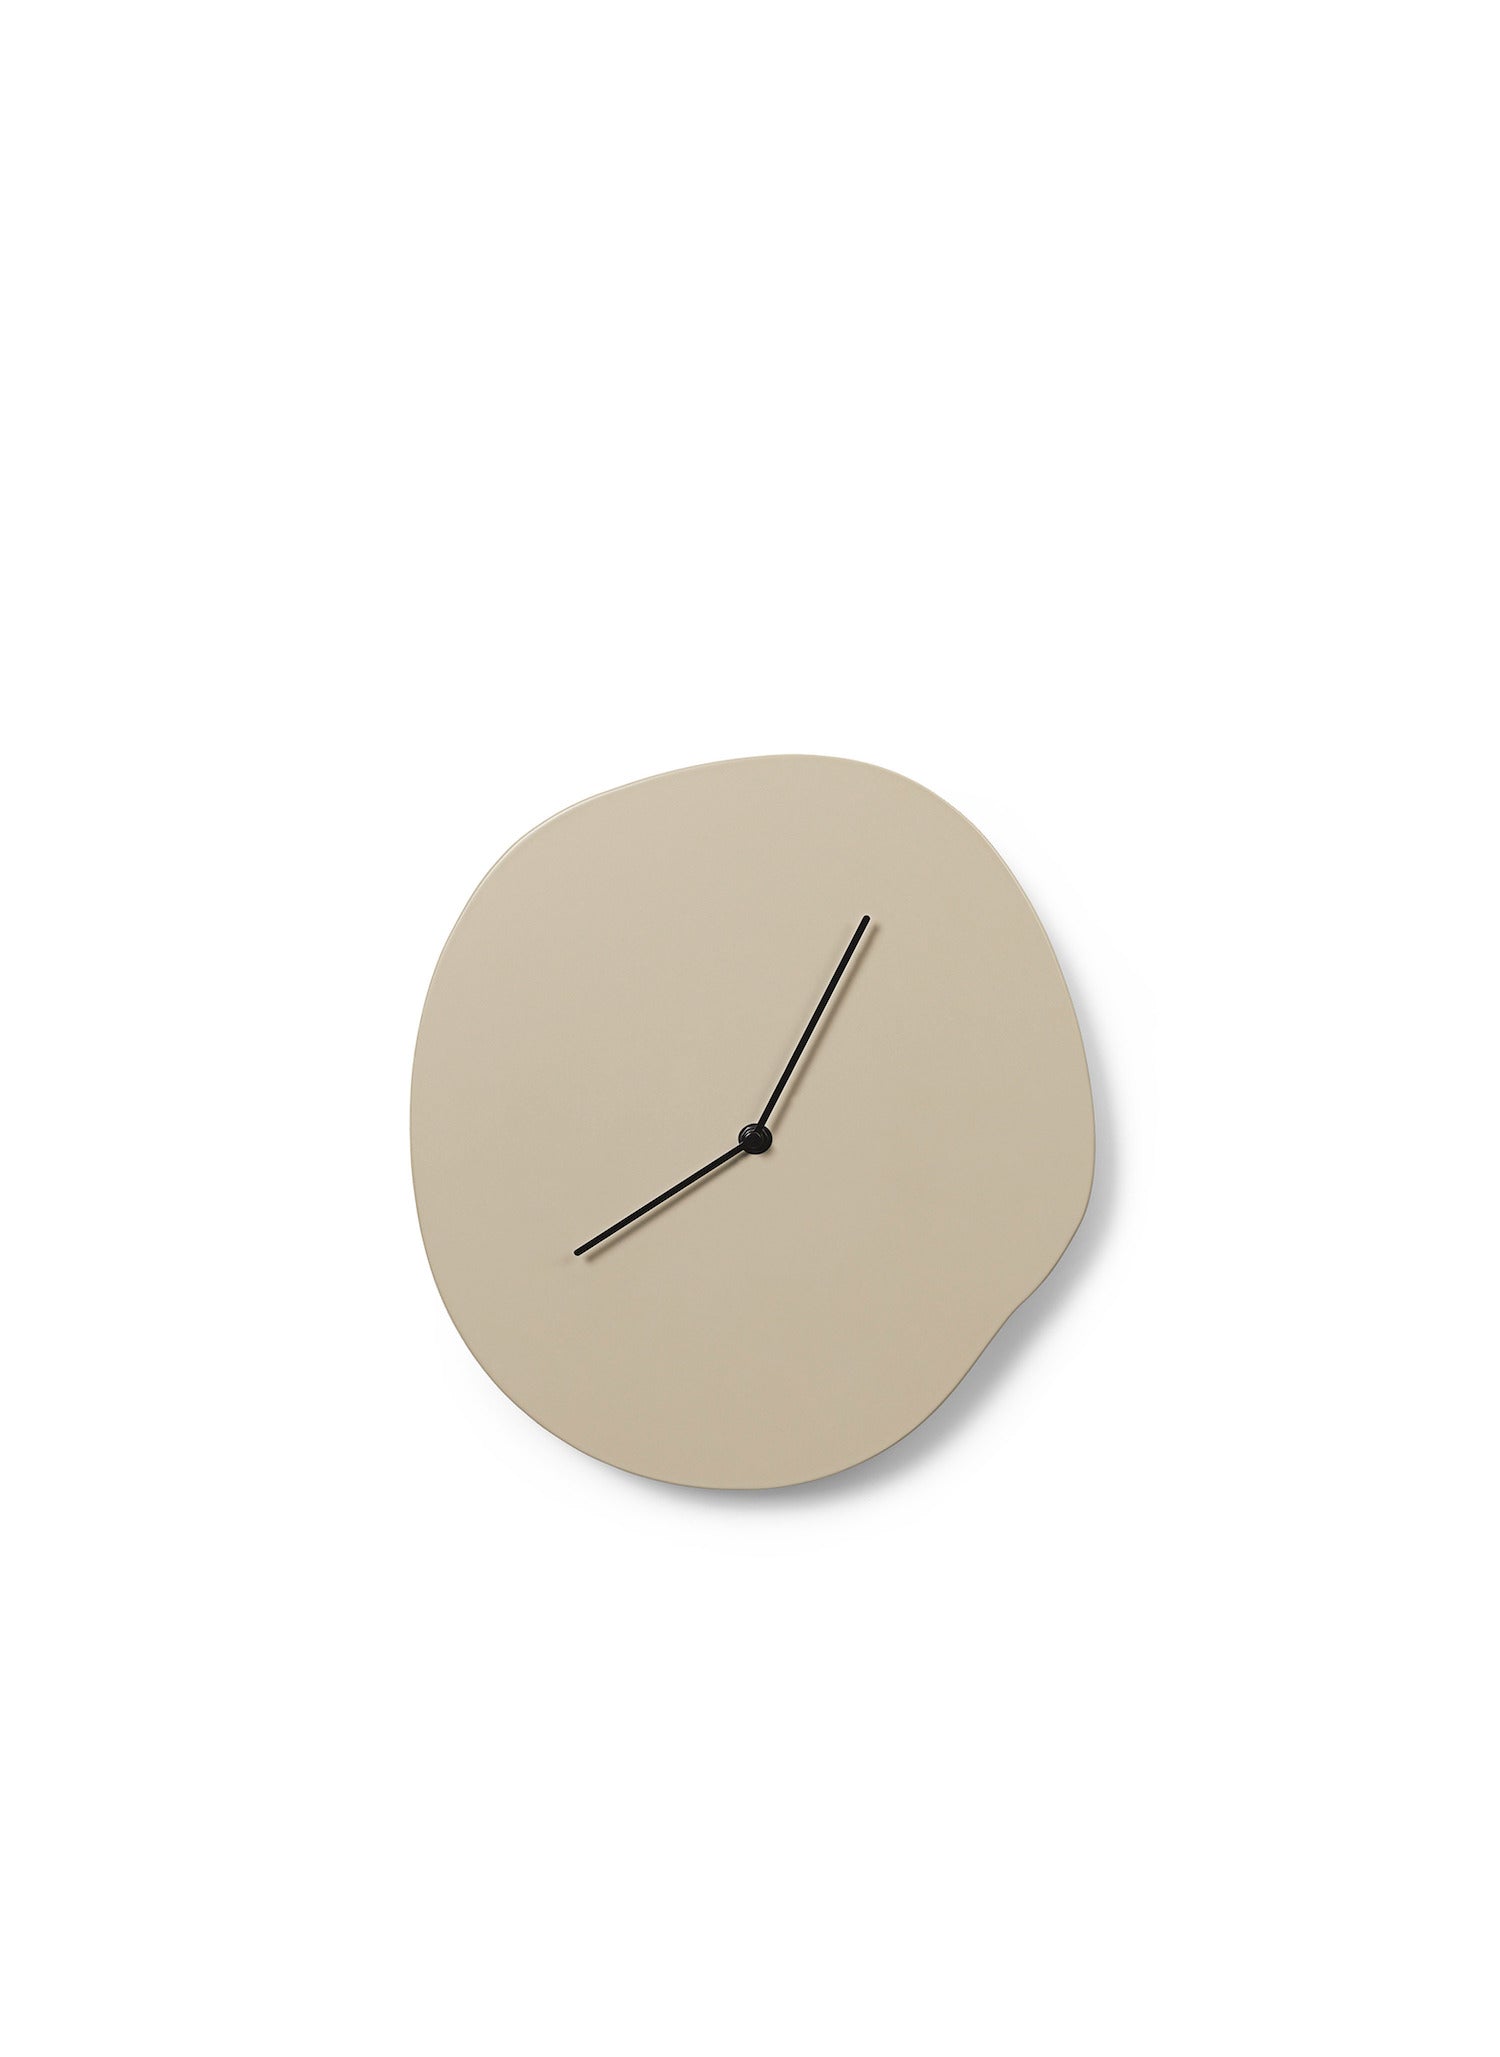 Melt Wall Clock. Inspired by surrealism, the sculptural Melt Wall Clock has a warped, fluid shape, giving the impression that the clock is melting.